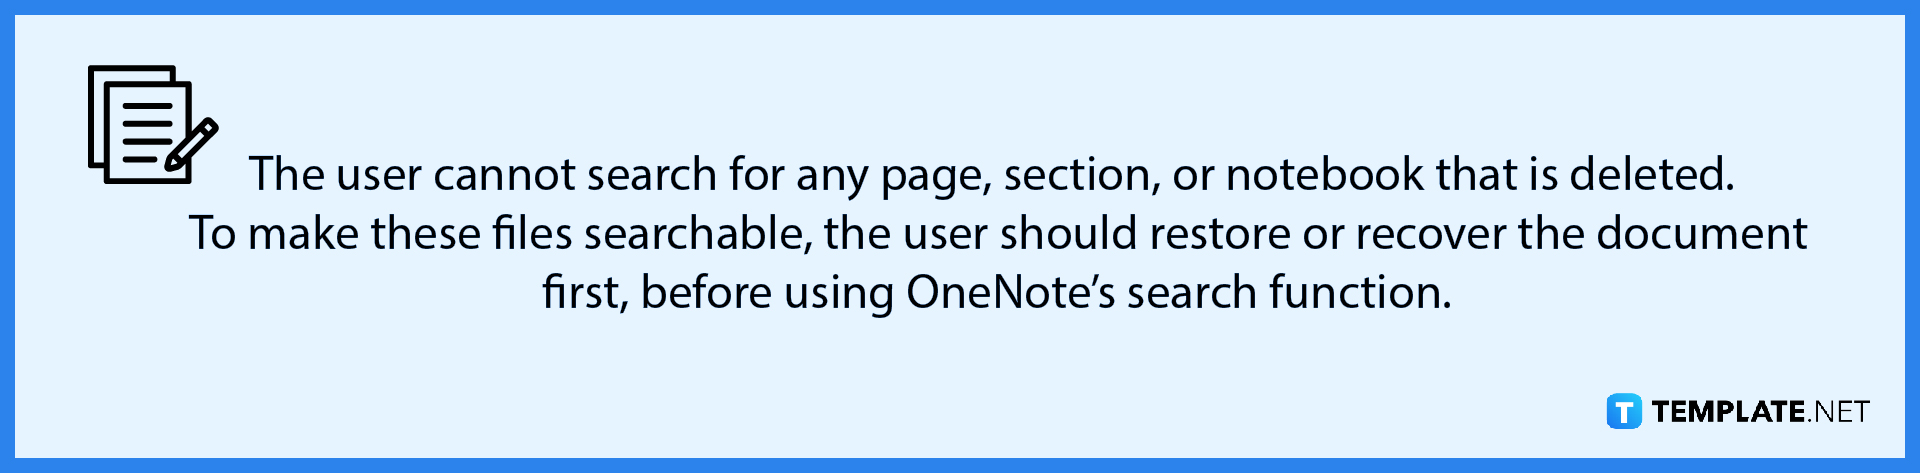 how-to-restore-deleted-pages-in-microsoft-onenote-note-2